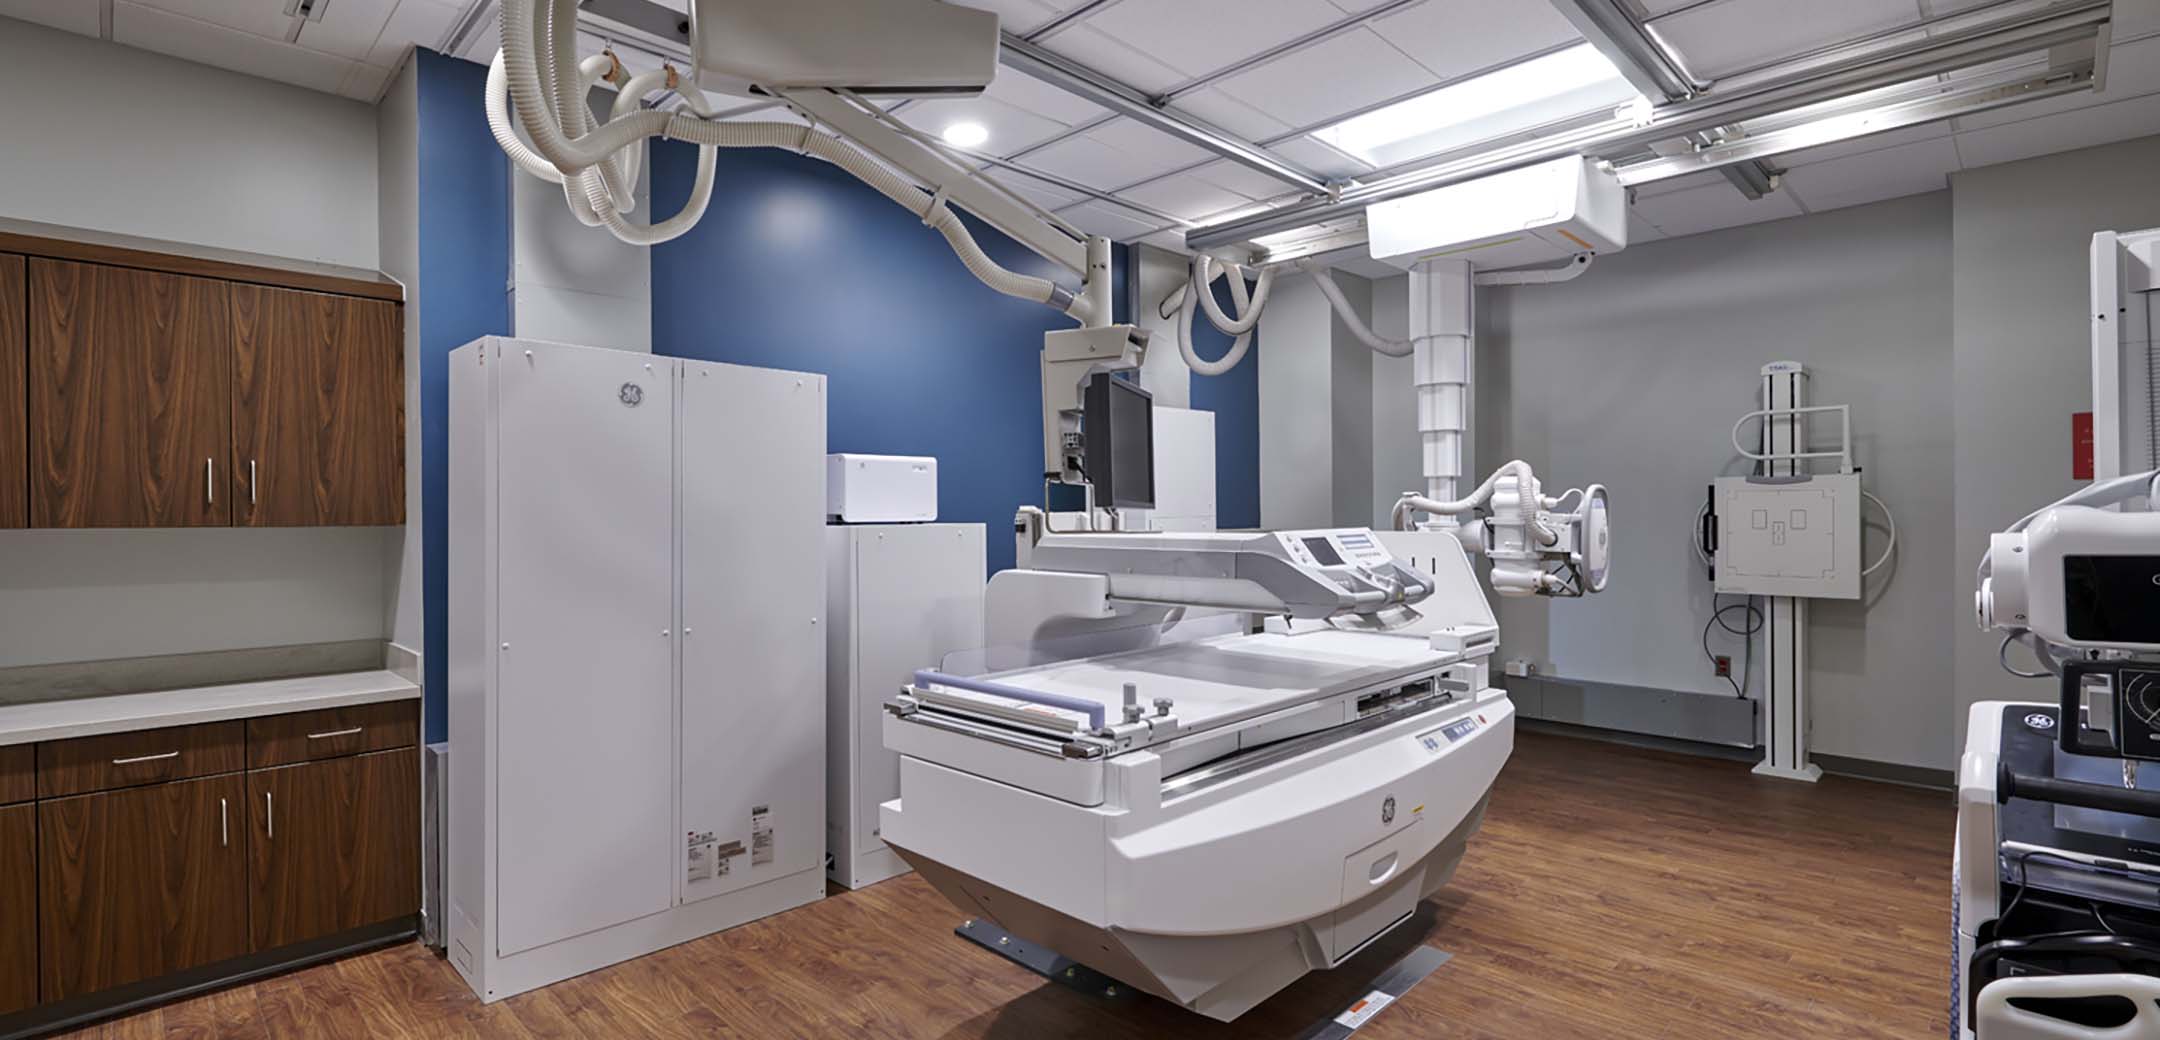 A close up of the St. Luke's Carbon County X-ray room showcasing the different standing and laying x-ray machine equipment.